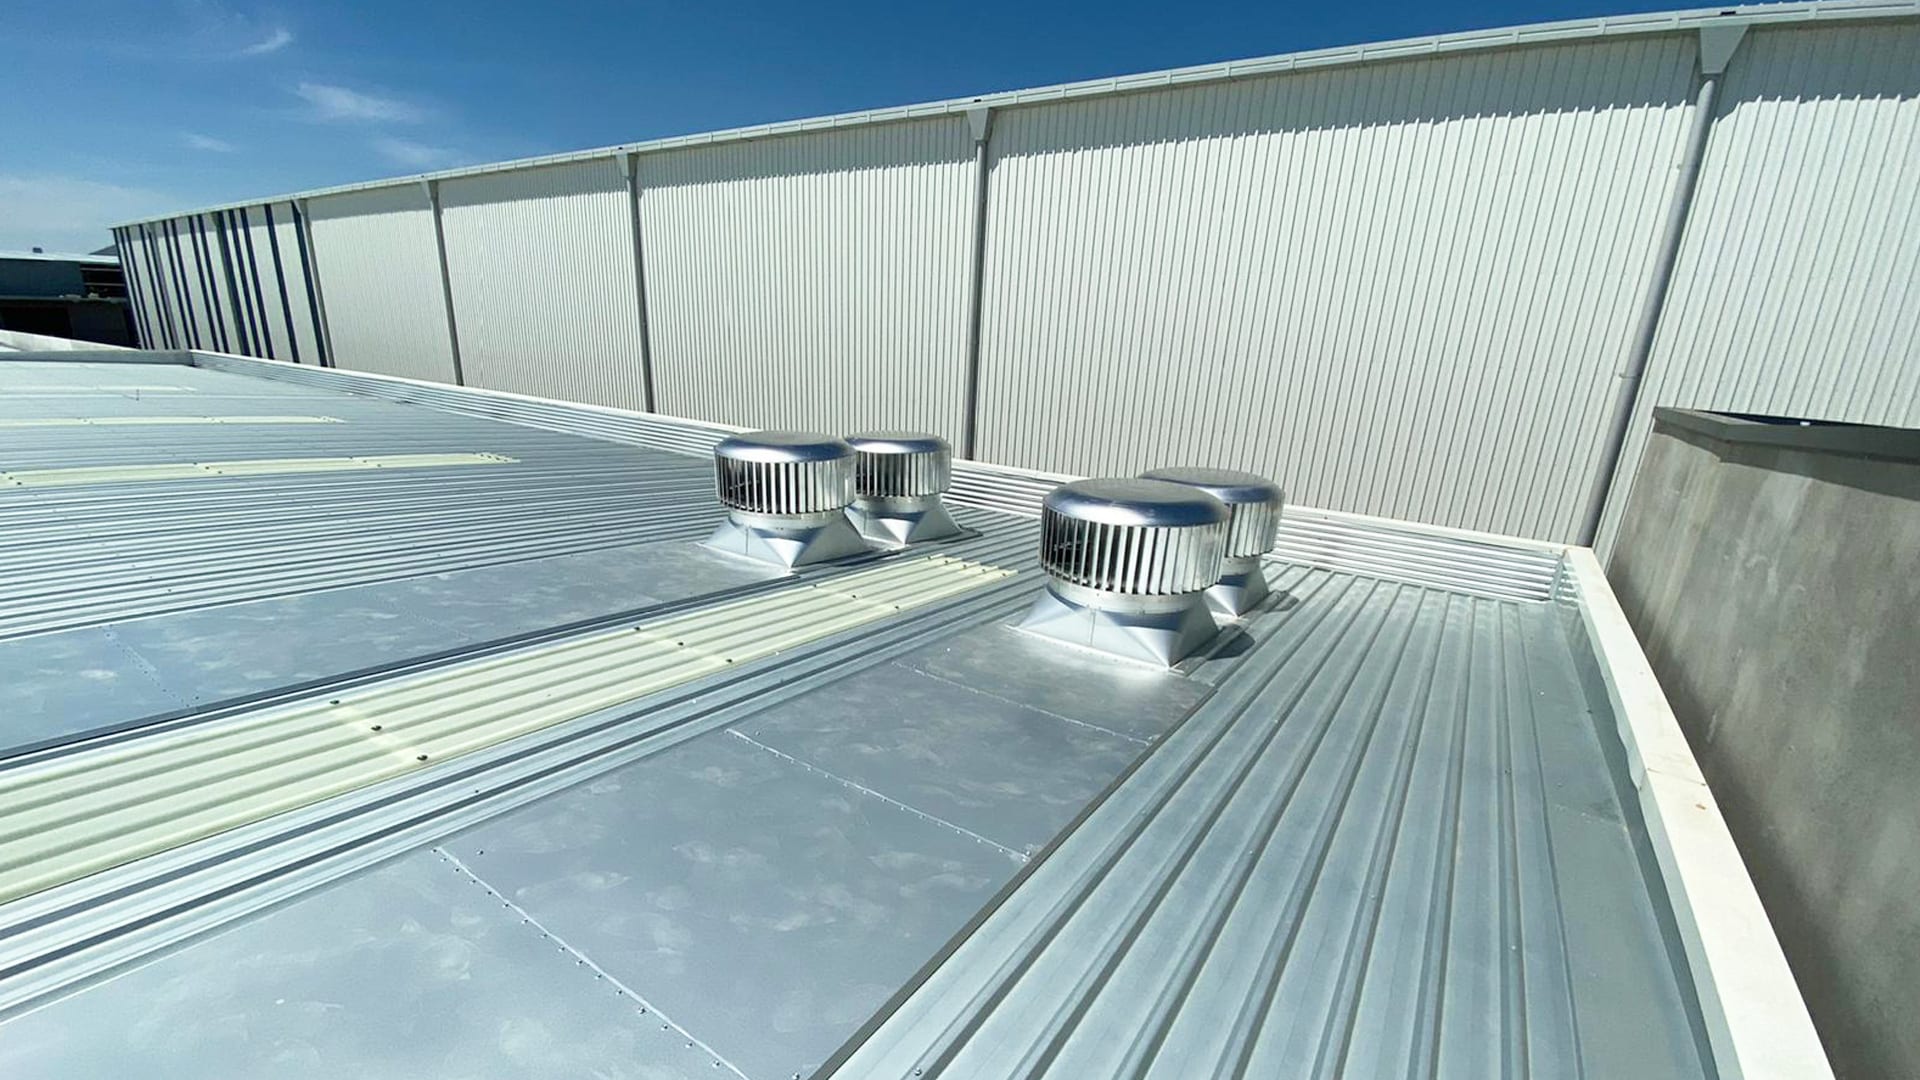 Rotary Vents with Back Trays on Warehouse Roof